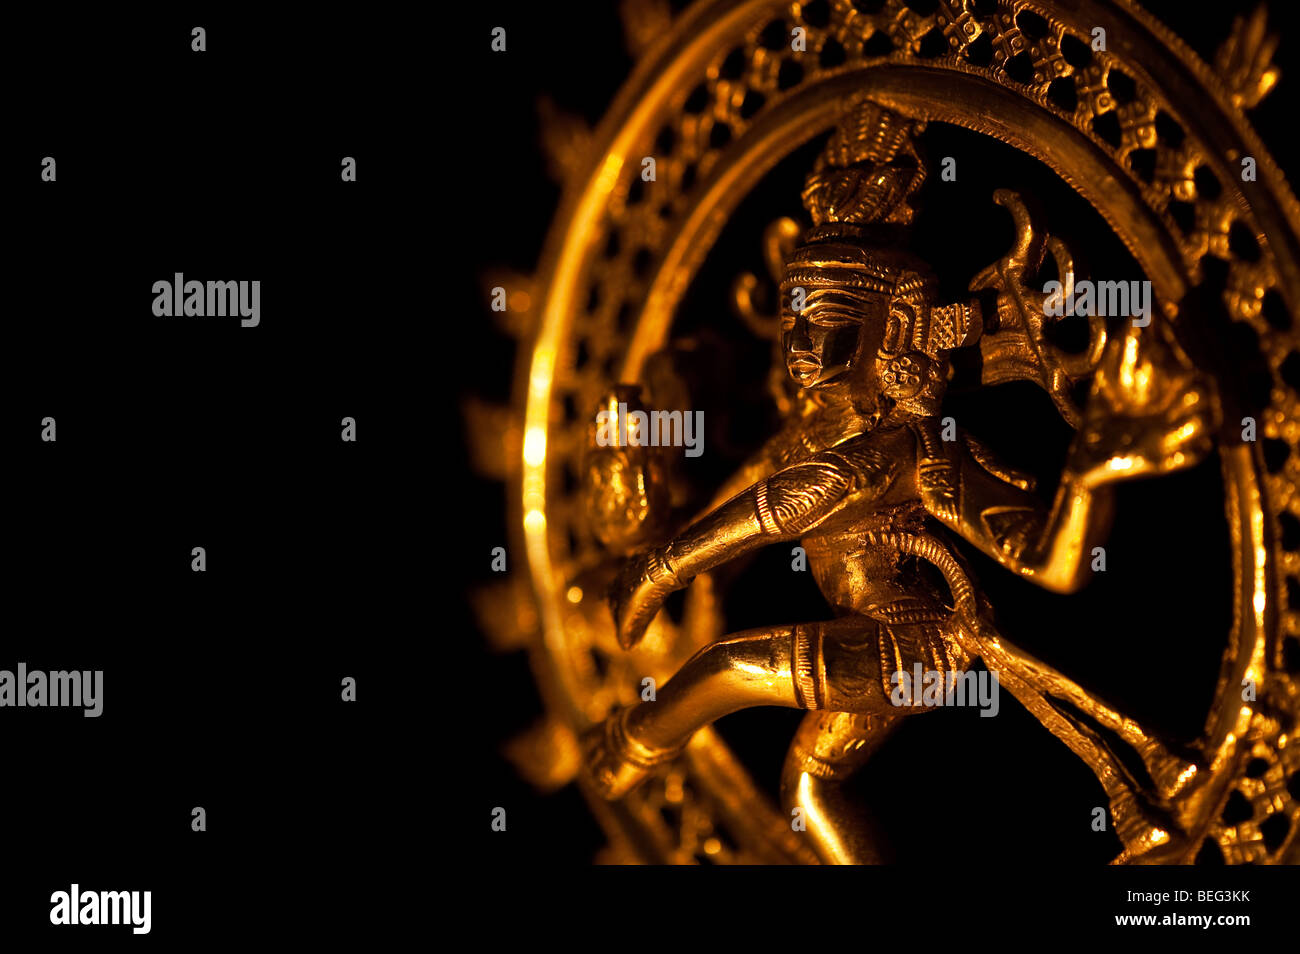 Nataraj High Resolution Stock Photography And Images Alamy Looking for the best jiraiya wallpaper hd? https www alamy com stock photo dancing lord shiva statue nataraja against black background 26169687 html